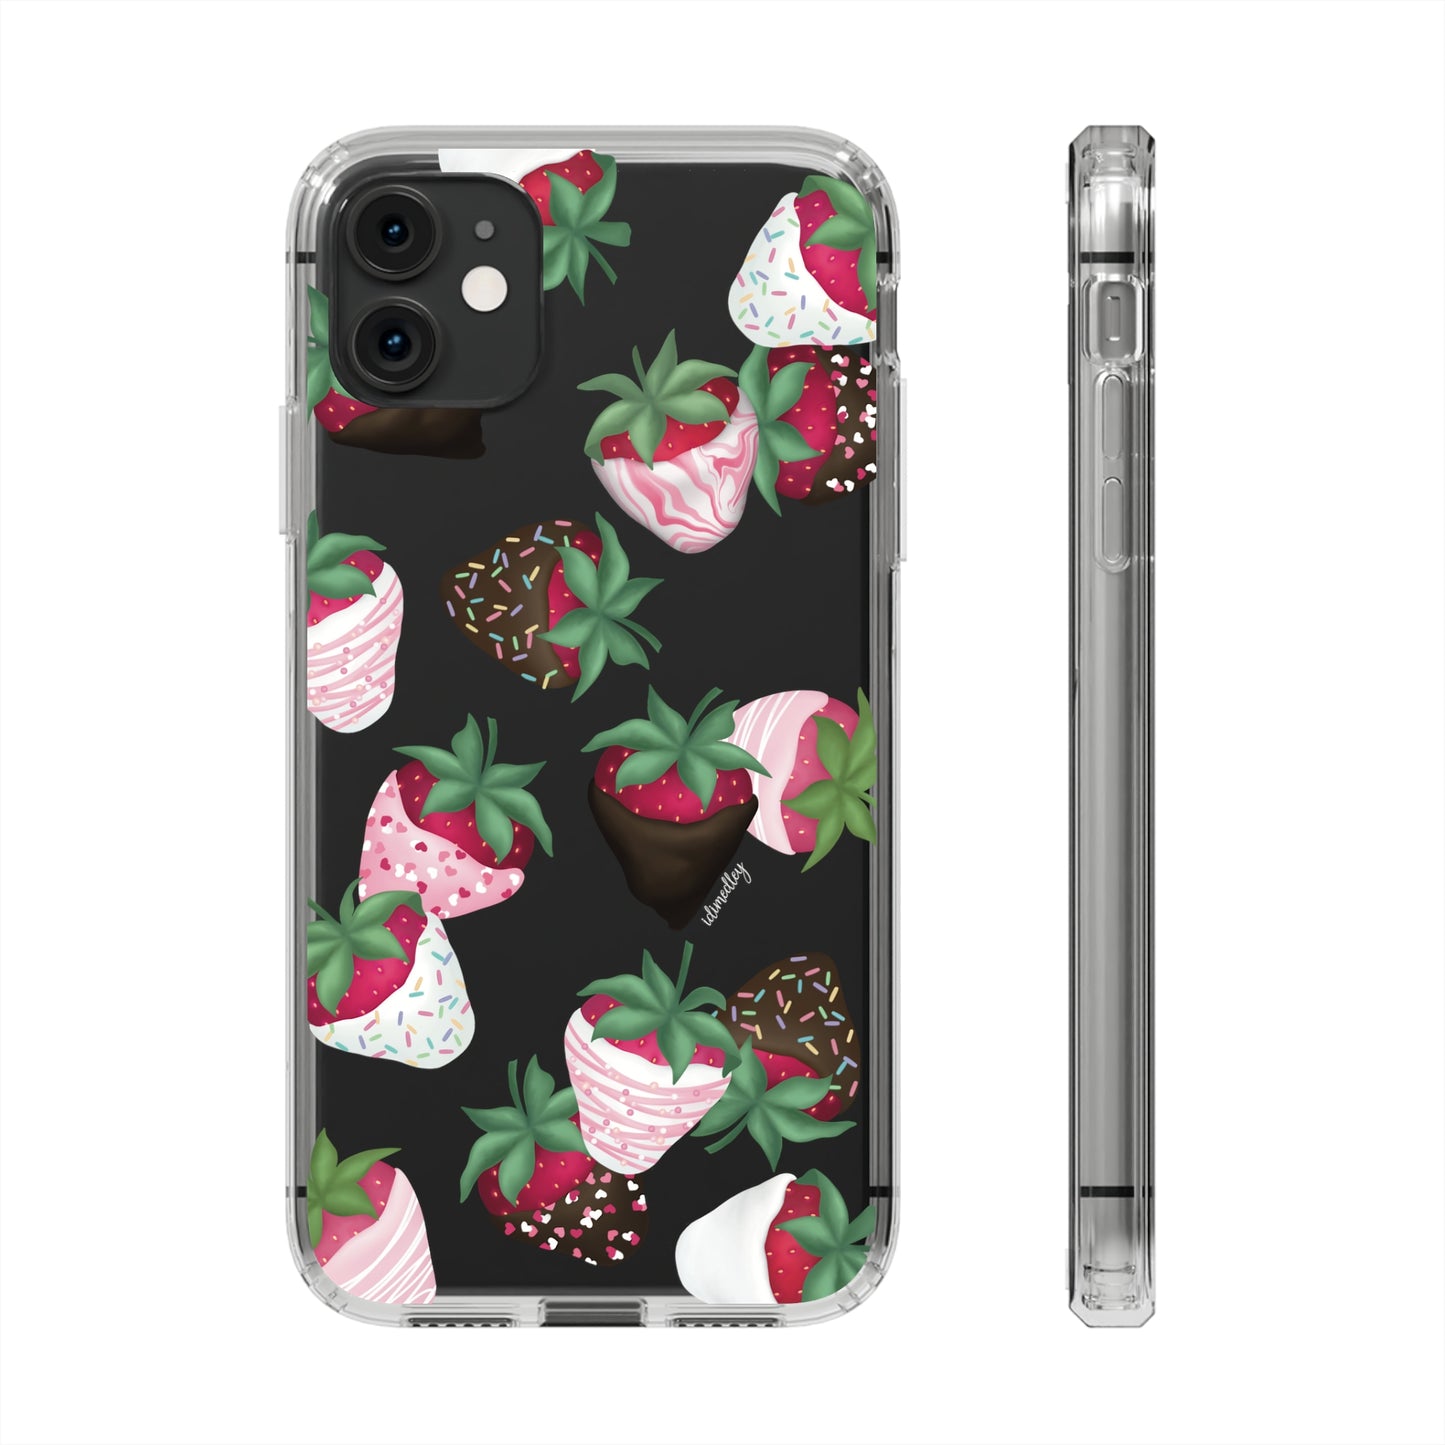 Strawberry Dipped Confections CLEAR Case